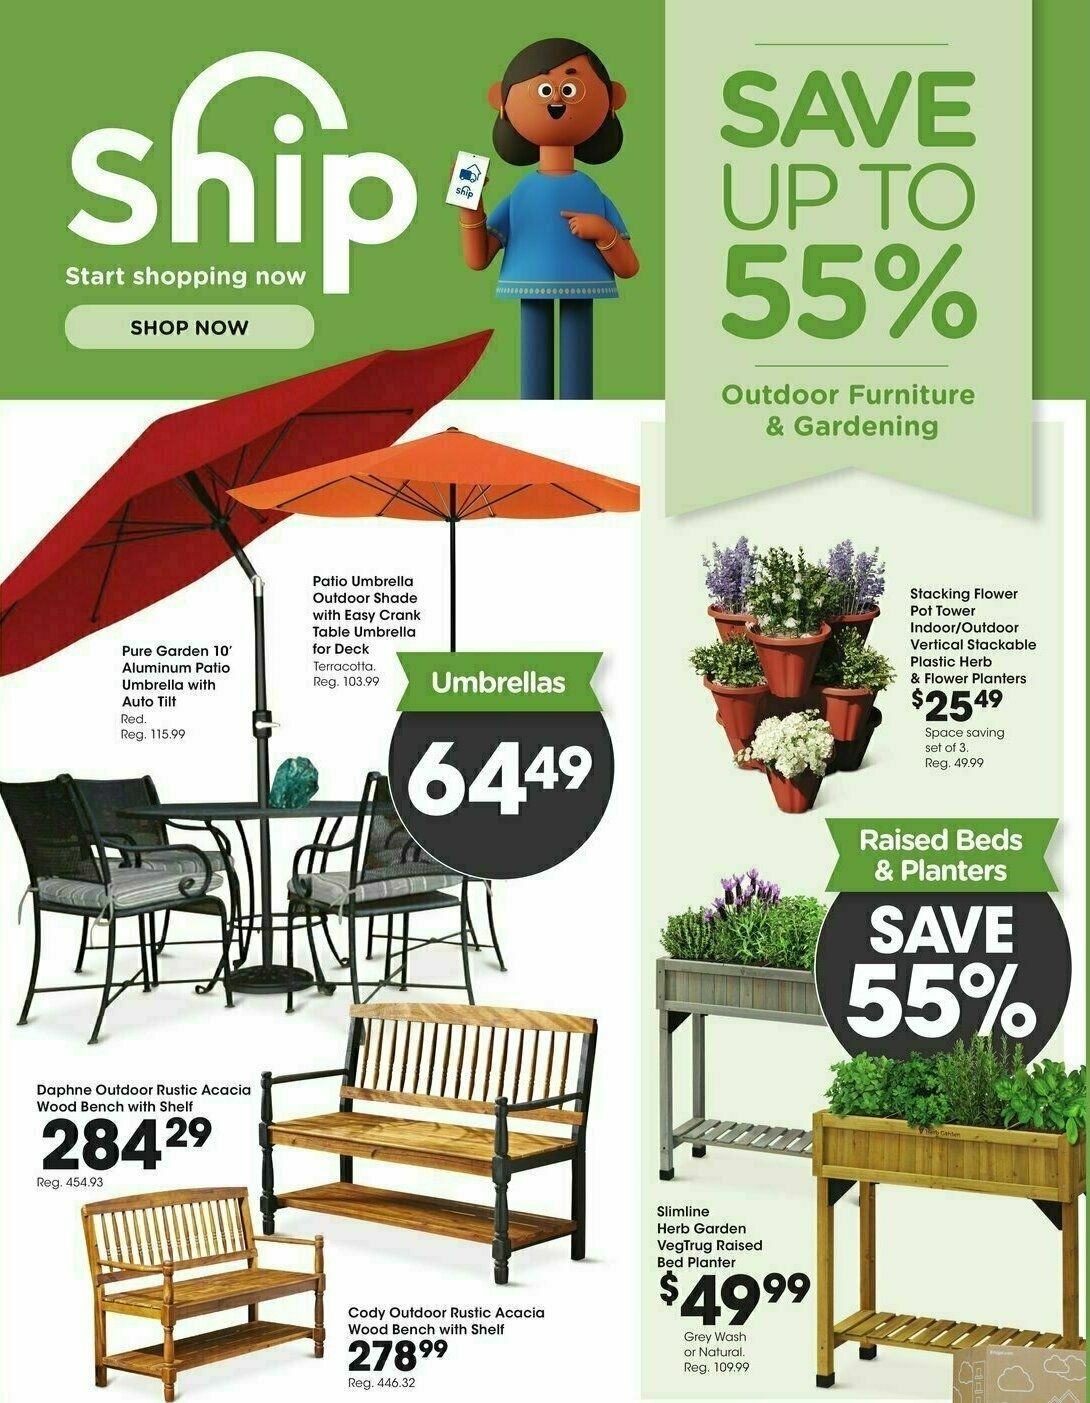 QFC Ship to Home Weekly Ad from March 20